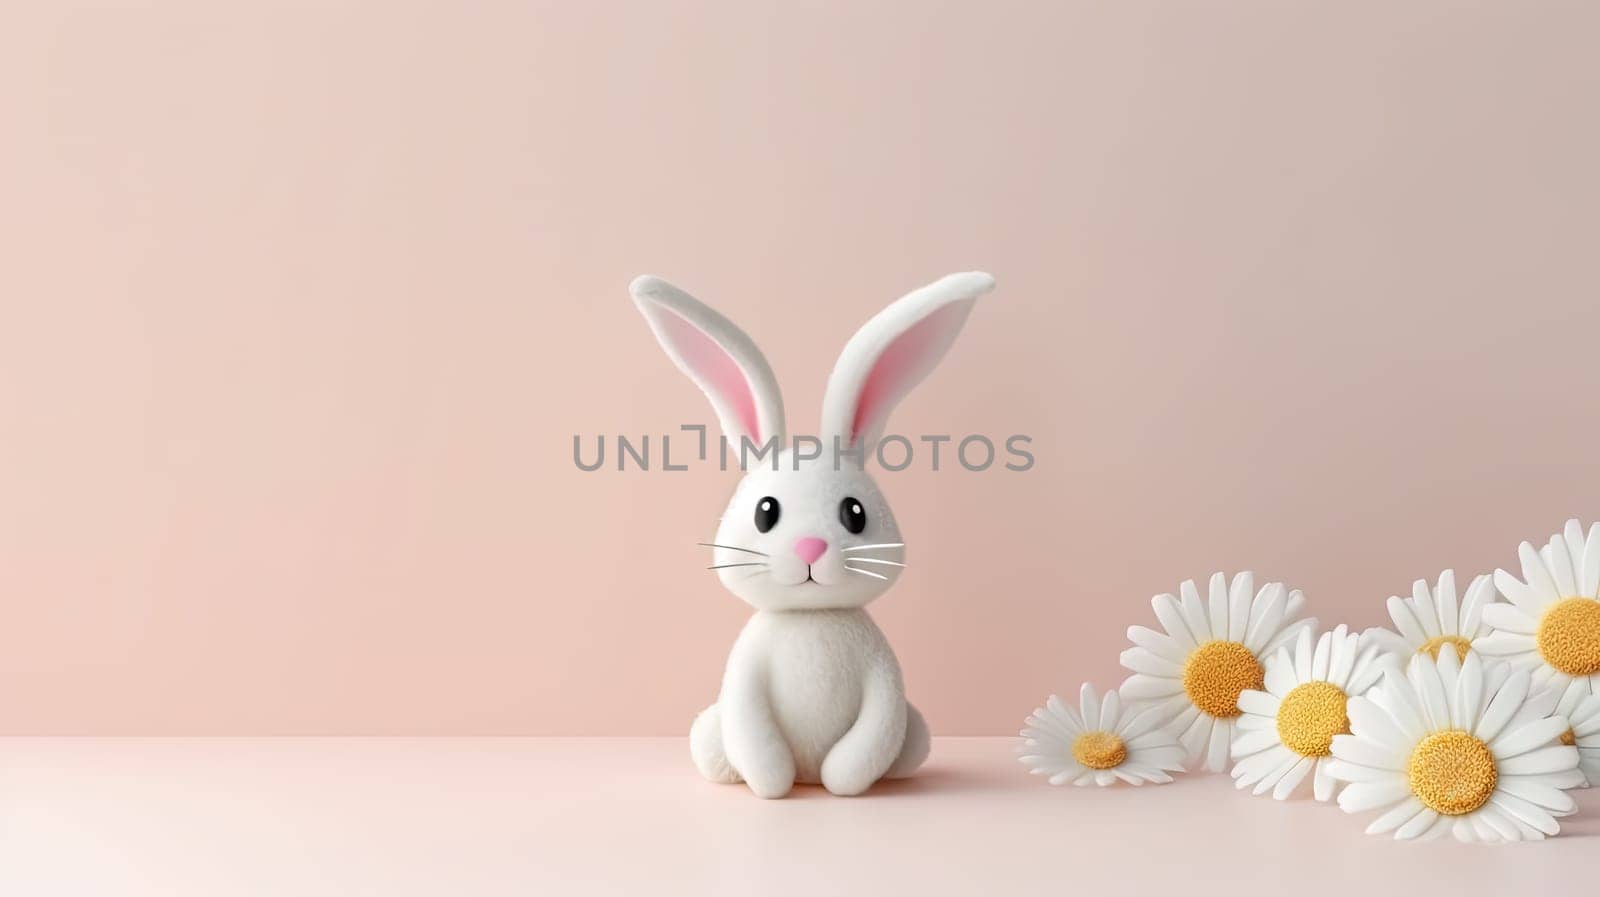 the Easter bunny sits surrounded by daisies by Alla_Morozova93